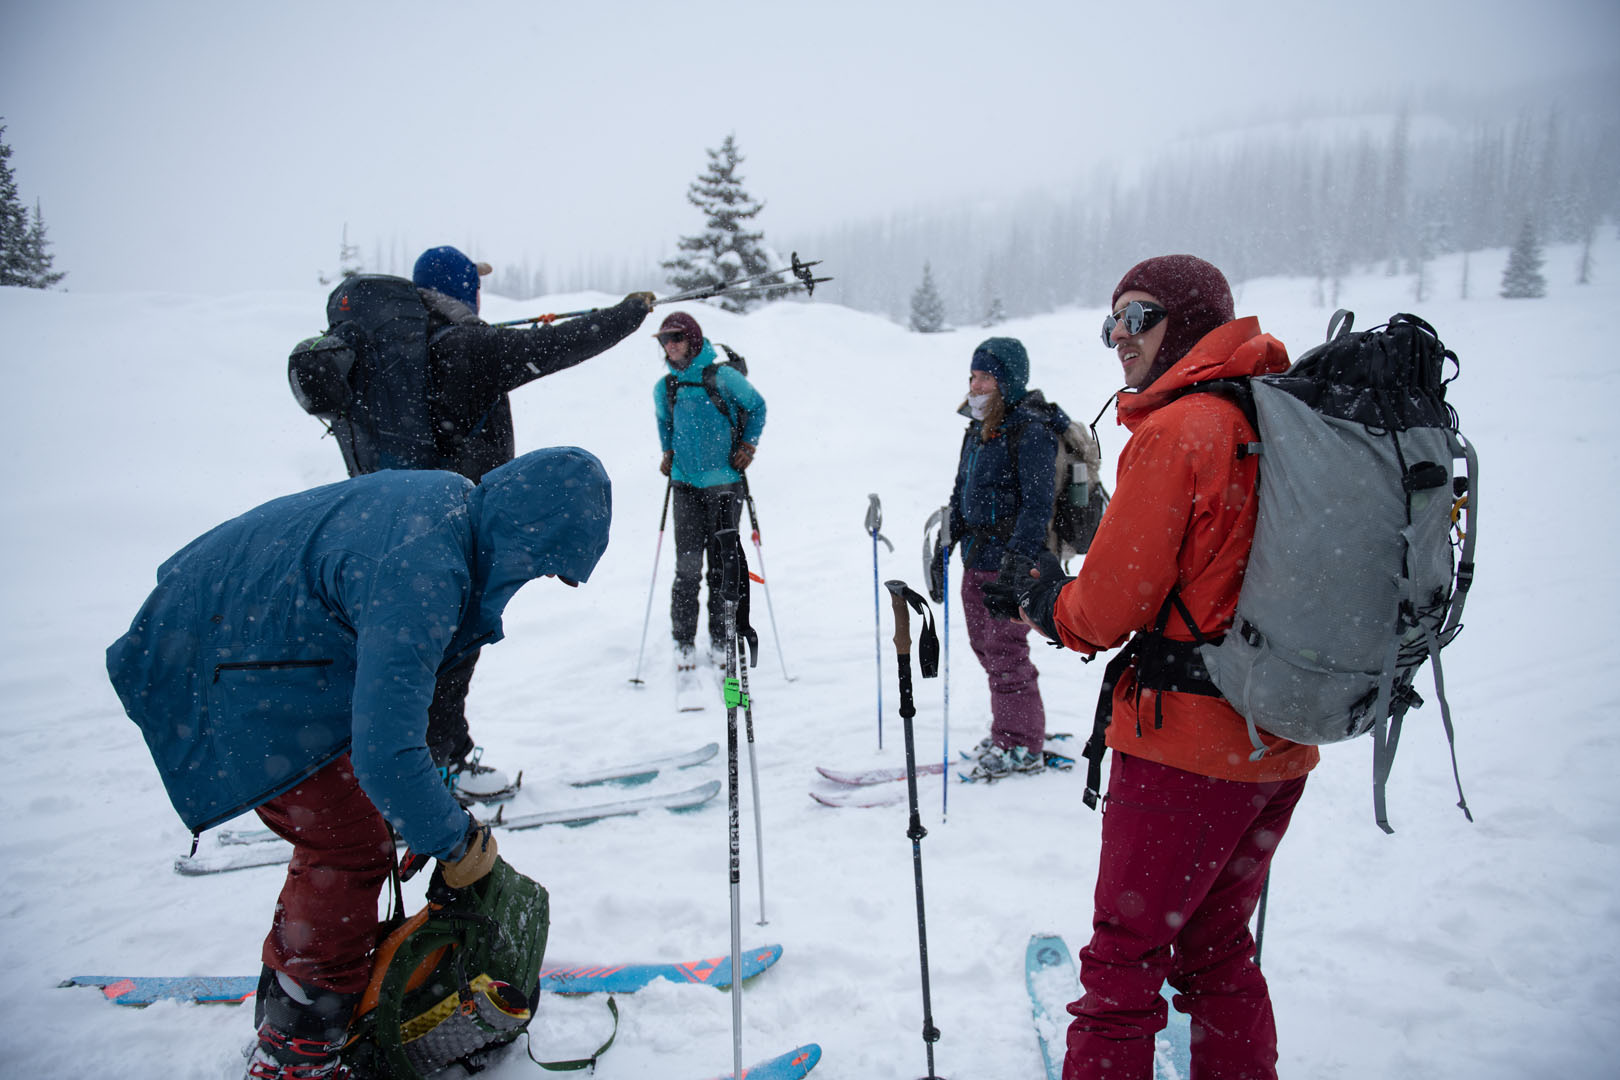 (L-R) Rueben Alters ’24, Jack Domeika ’23, Kate Reimer, Megan McVeigh ’23, and Owen Cox ’24 are pictured getting ready to leave for the day during their field trip to Wolf Creek Pass in their Snow Science Half Block class. Photo by Matthew Silverman '23, who served as a teaching assistant for the class. 